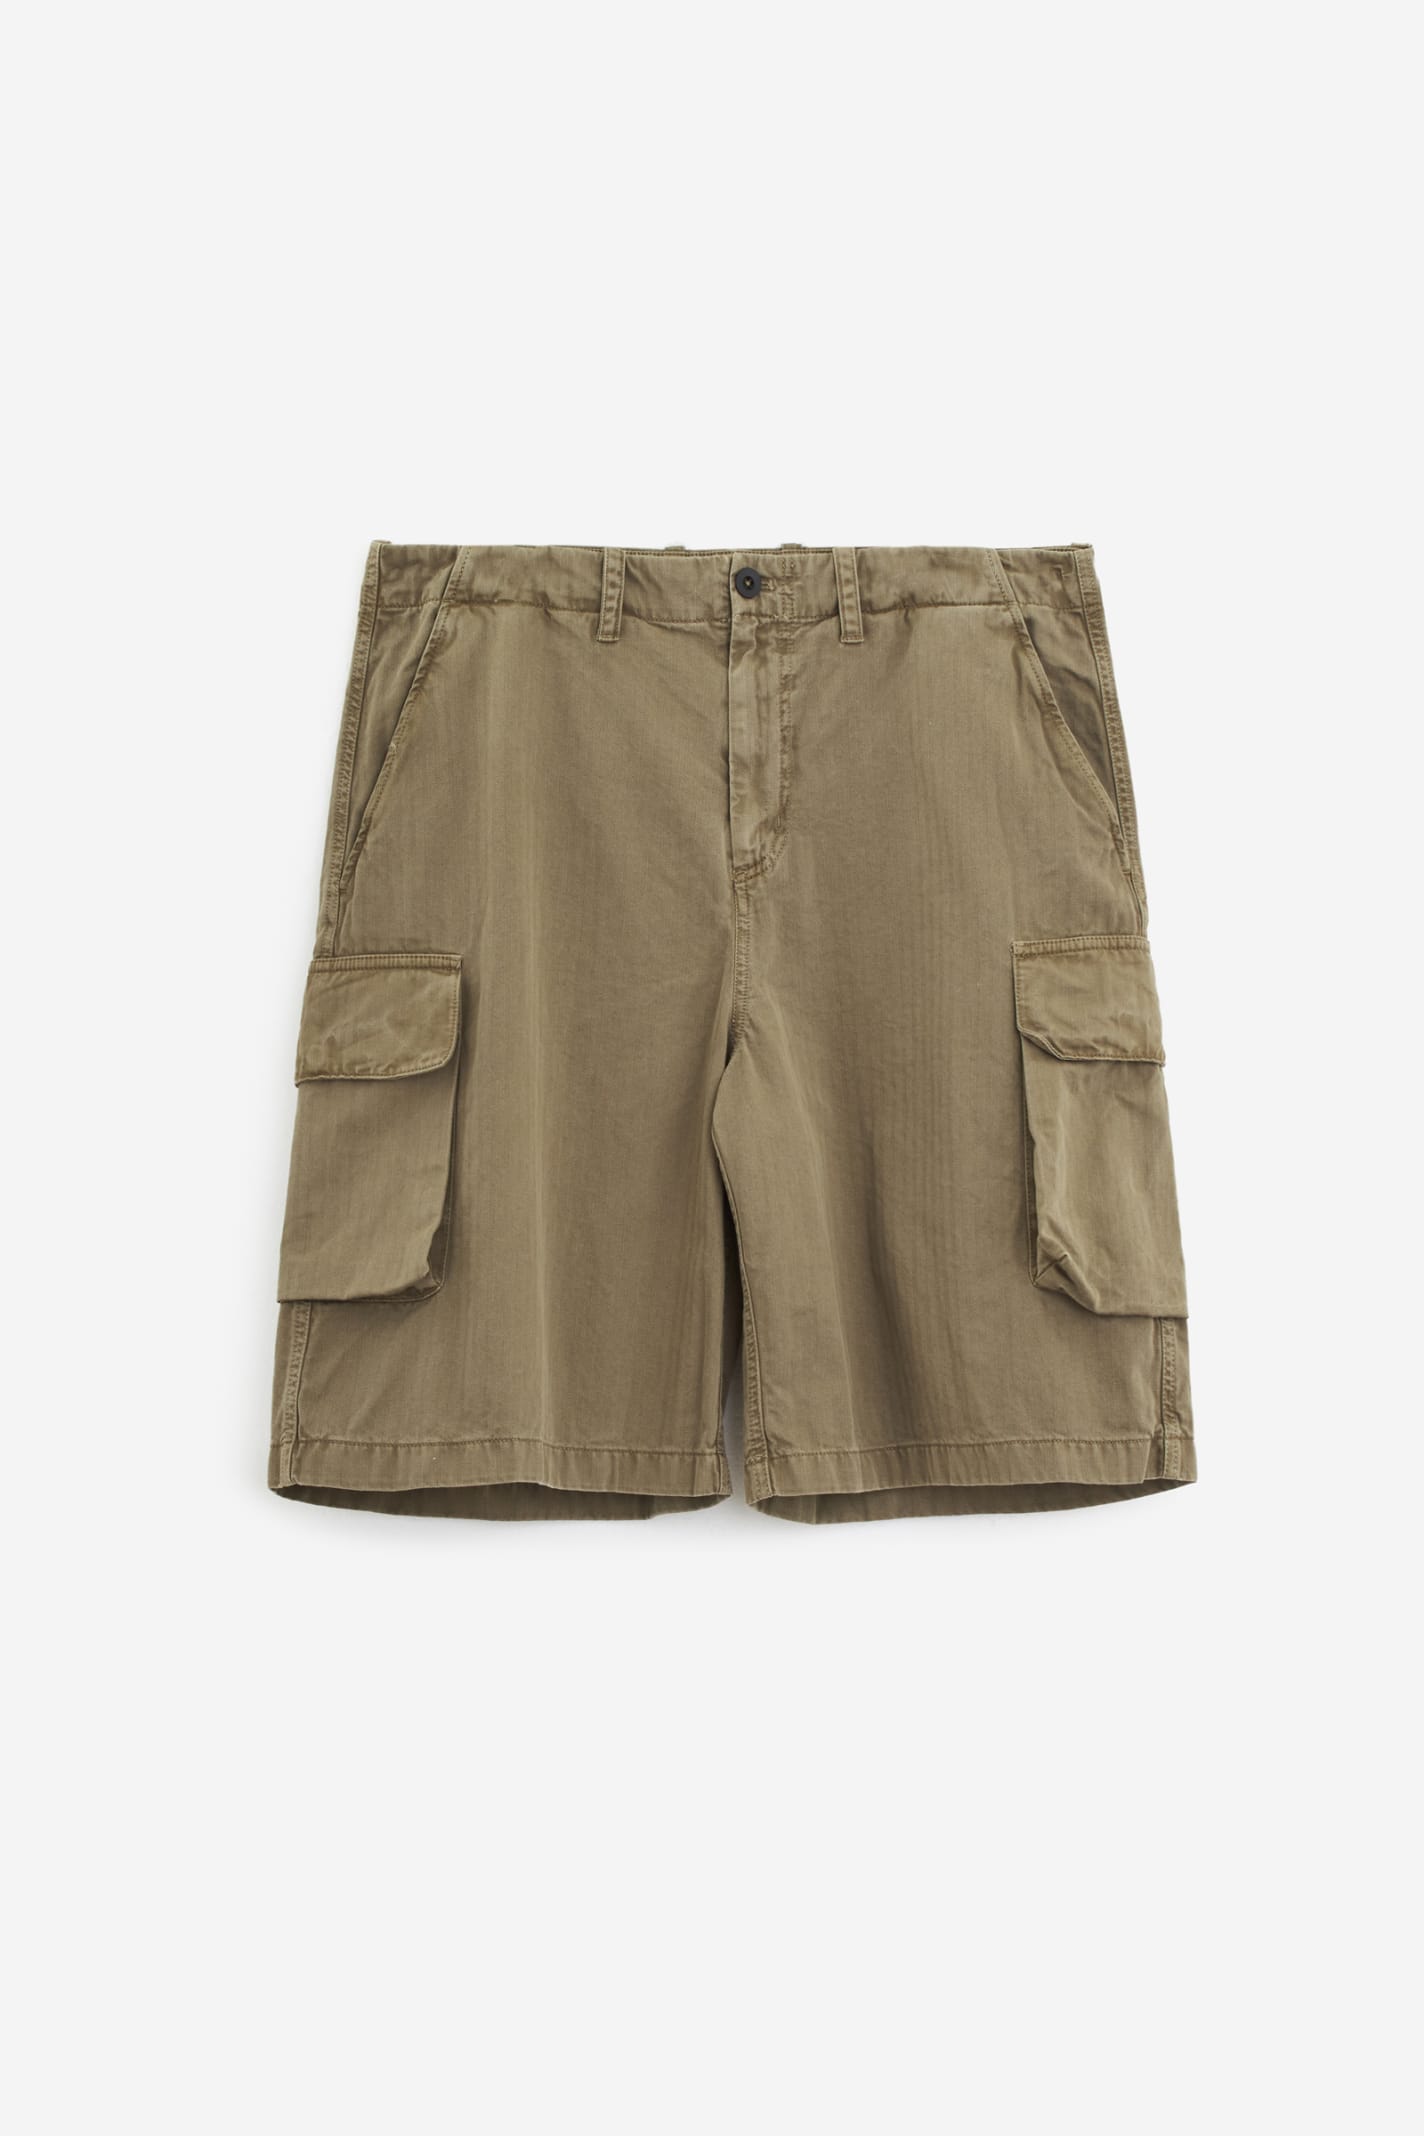 Shop Our Legacy Mount Shorts Shorts In Beige